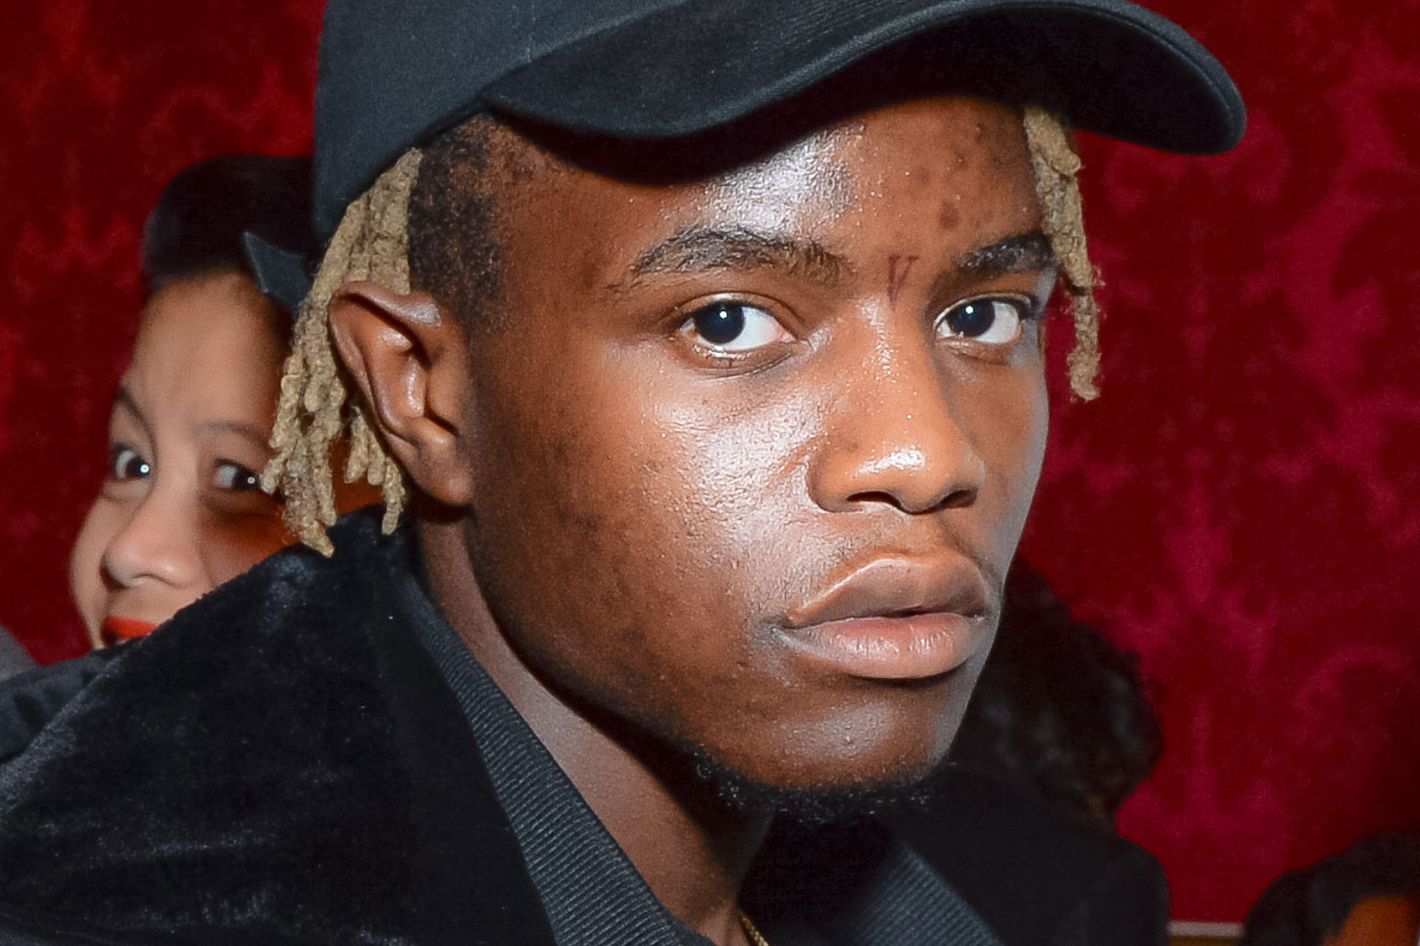 And Now Heres Accused Serial Rapist Ian Connor Threatening Women on Twitter